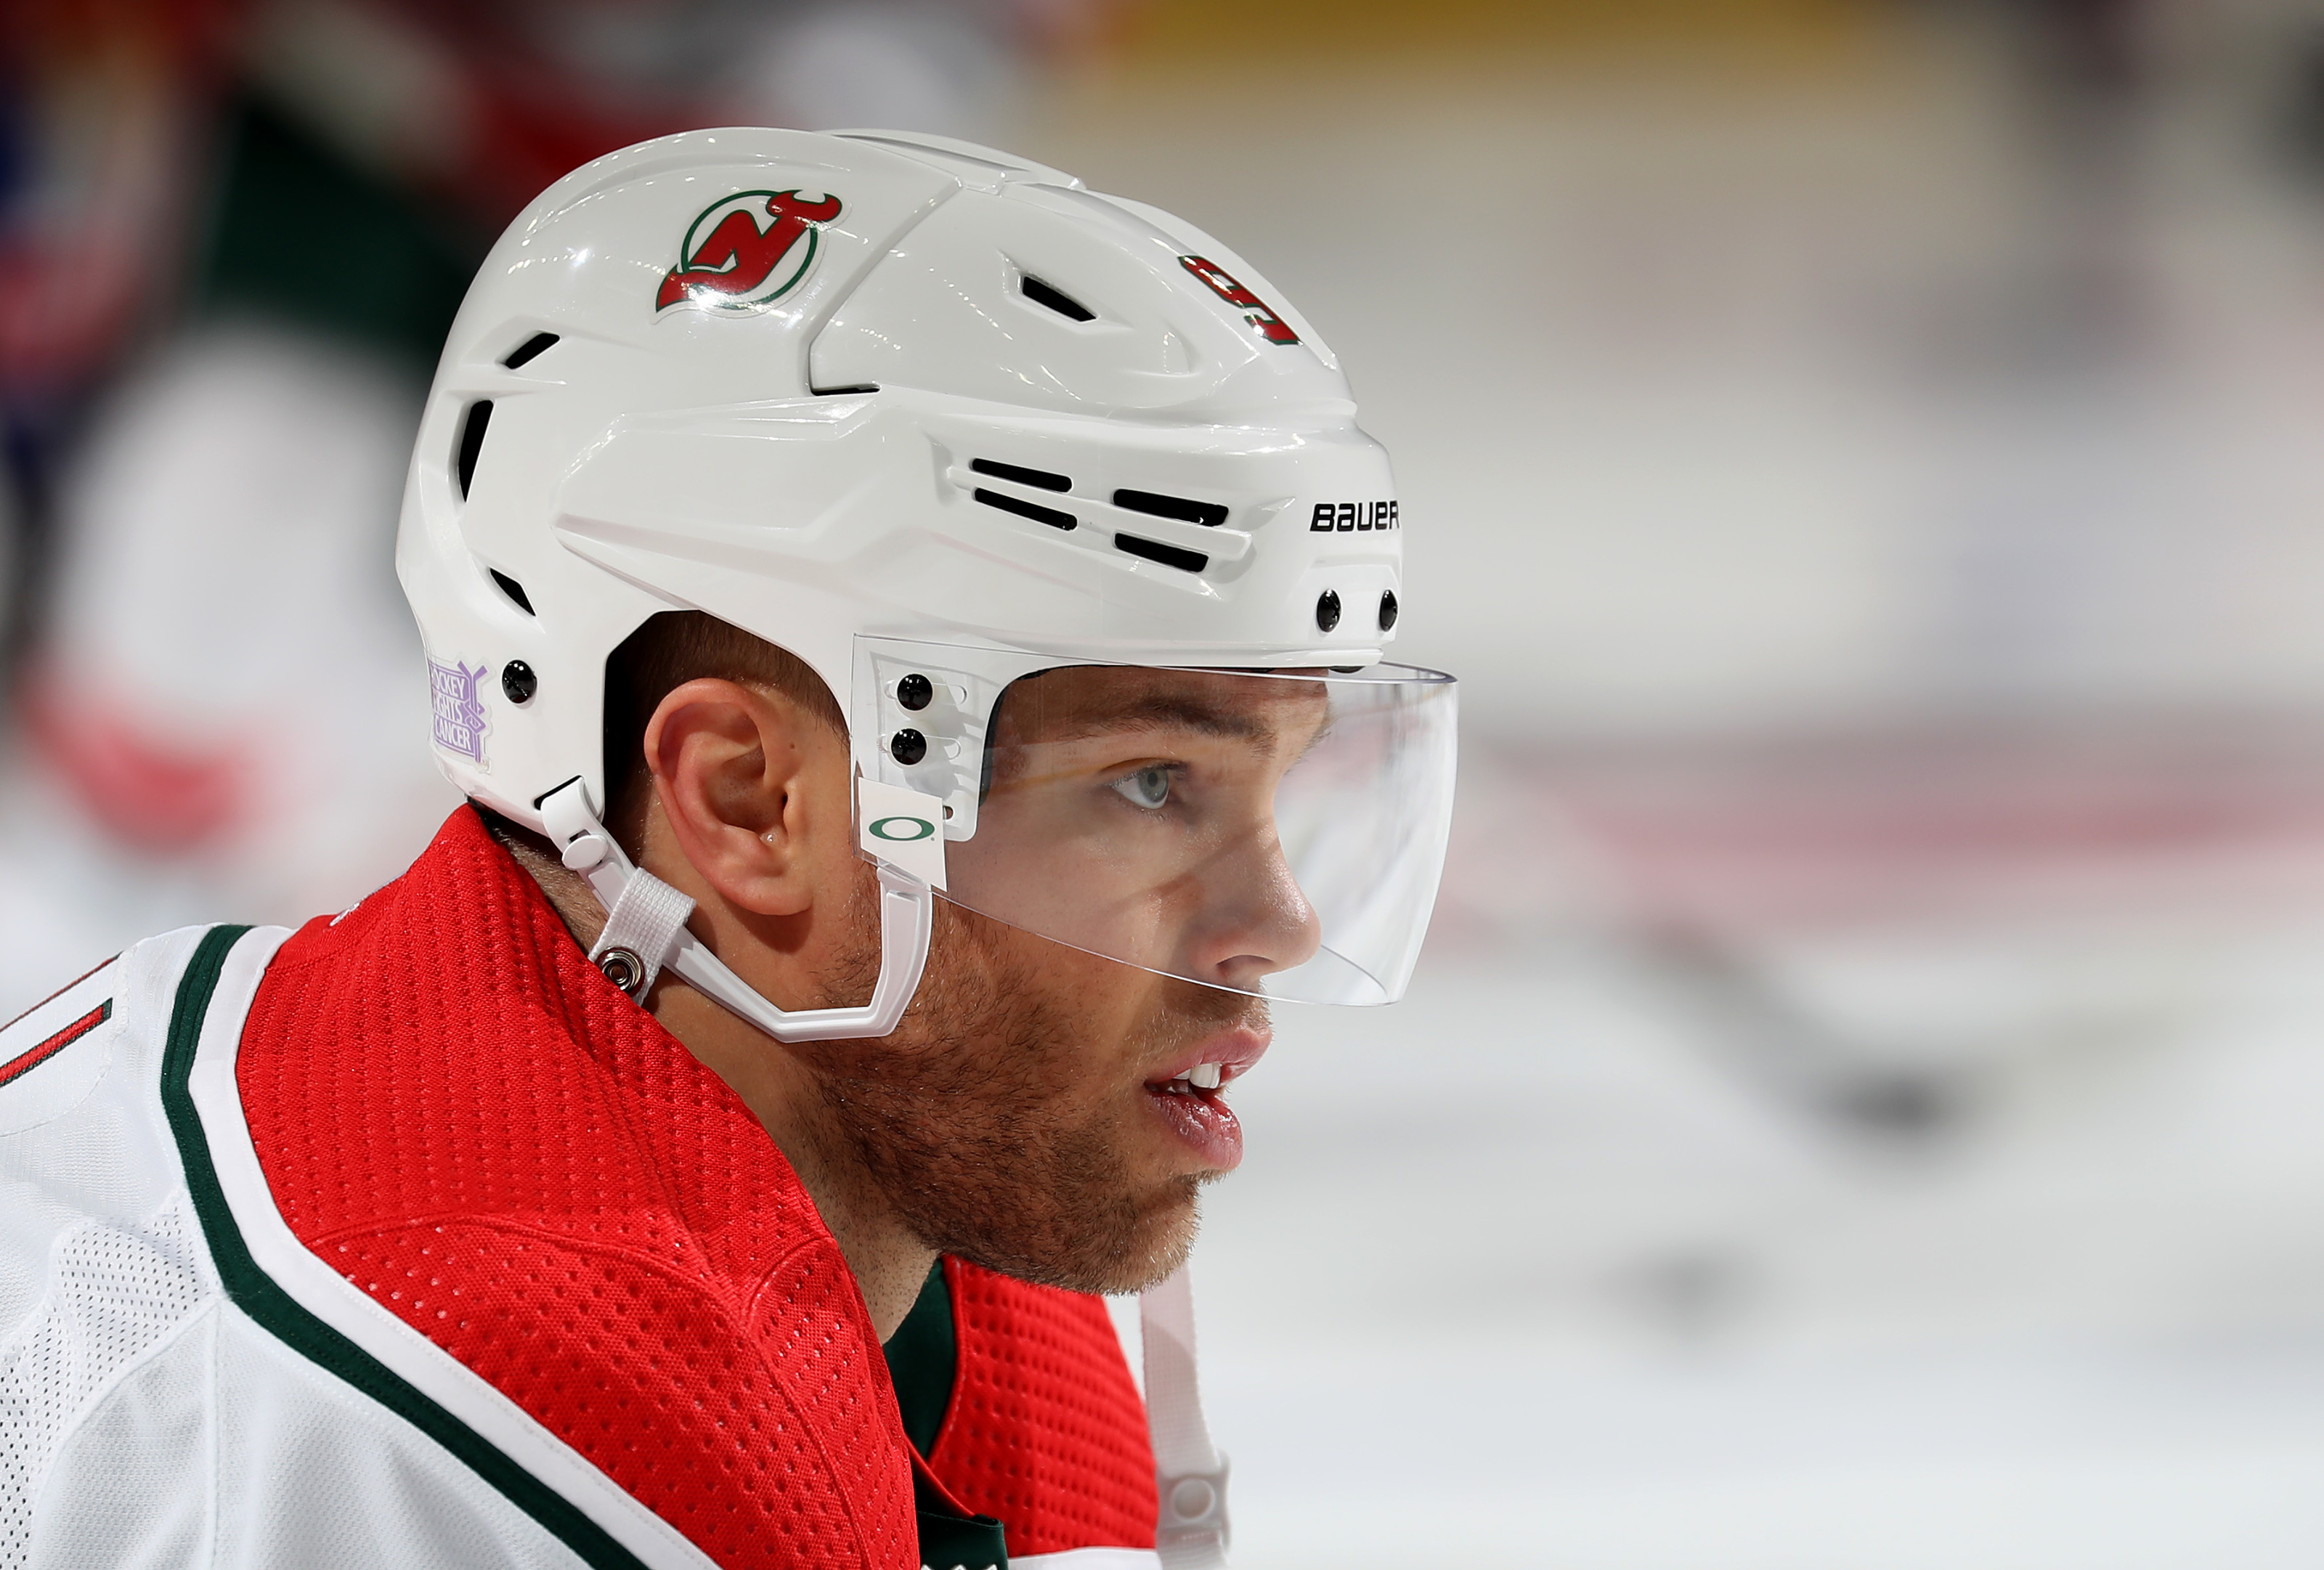 New Jersey Devils trade Taylor Hall to the Arizona Coyotes